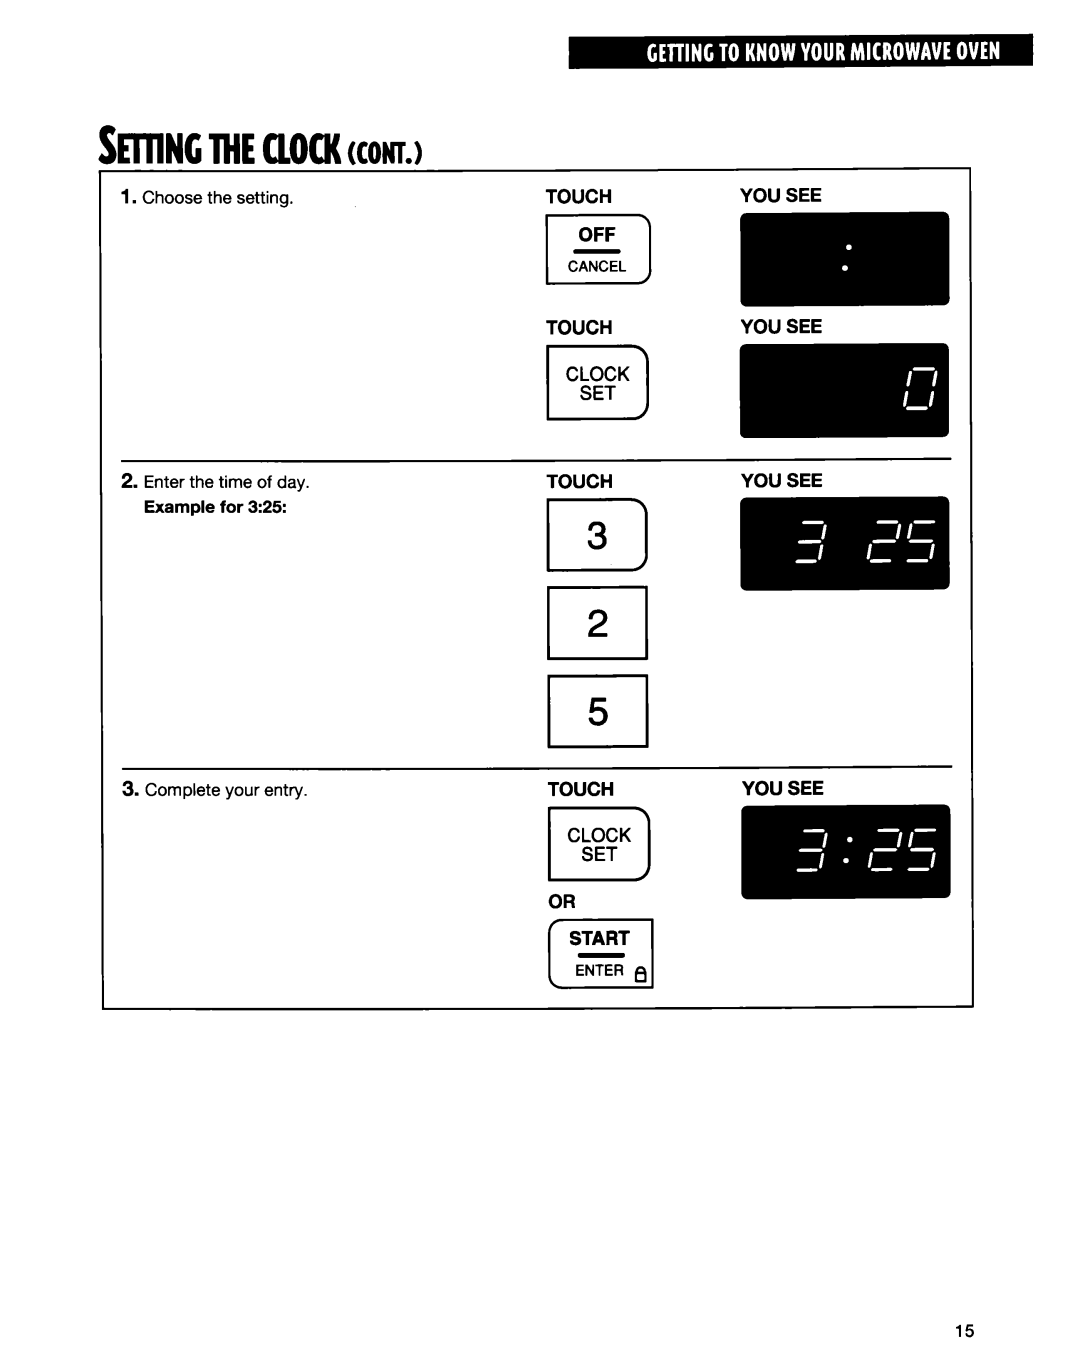 Whirlpool MT6120XE, MT9160XE installation instructions SElllNCMECLOCKcow, You See, OR LSTART-l, Touch 